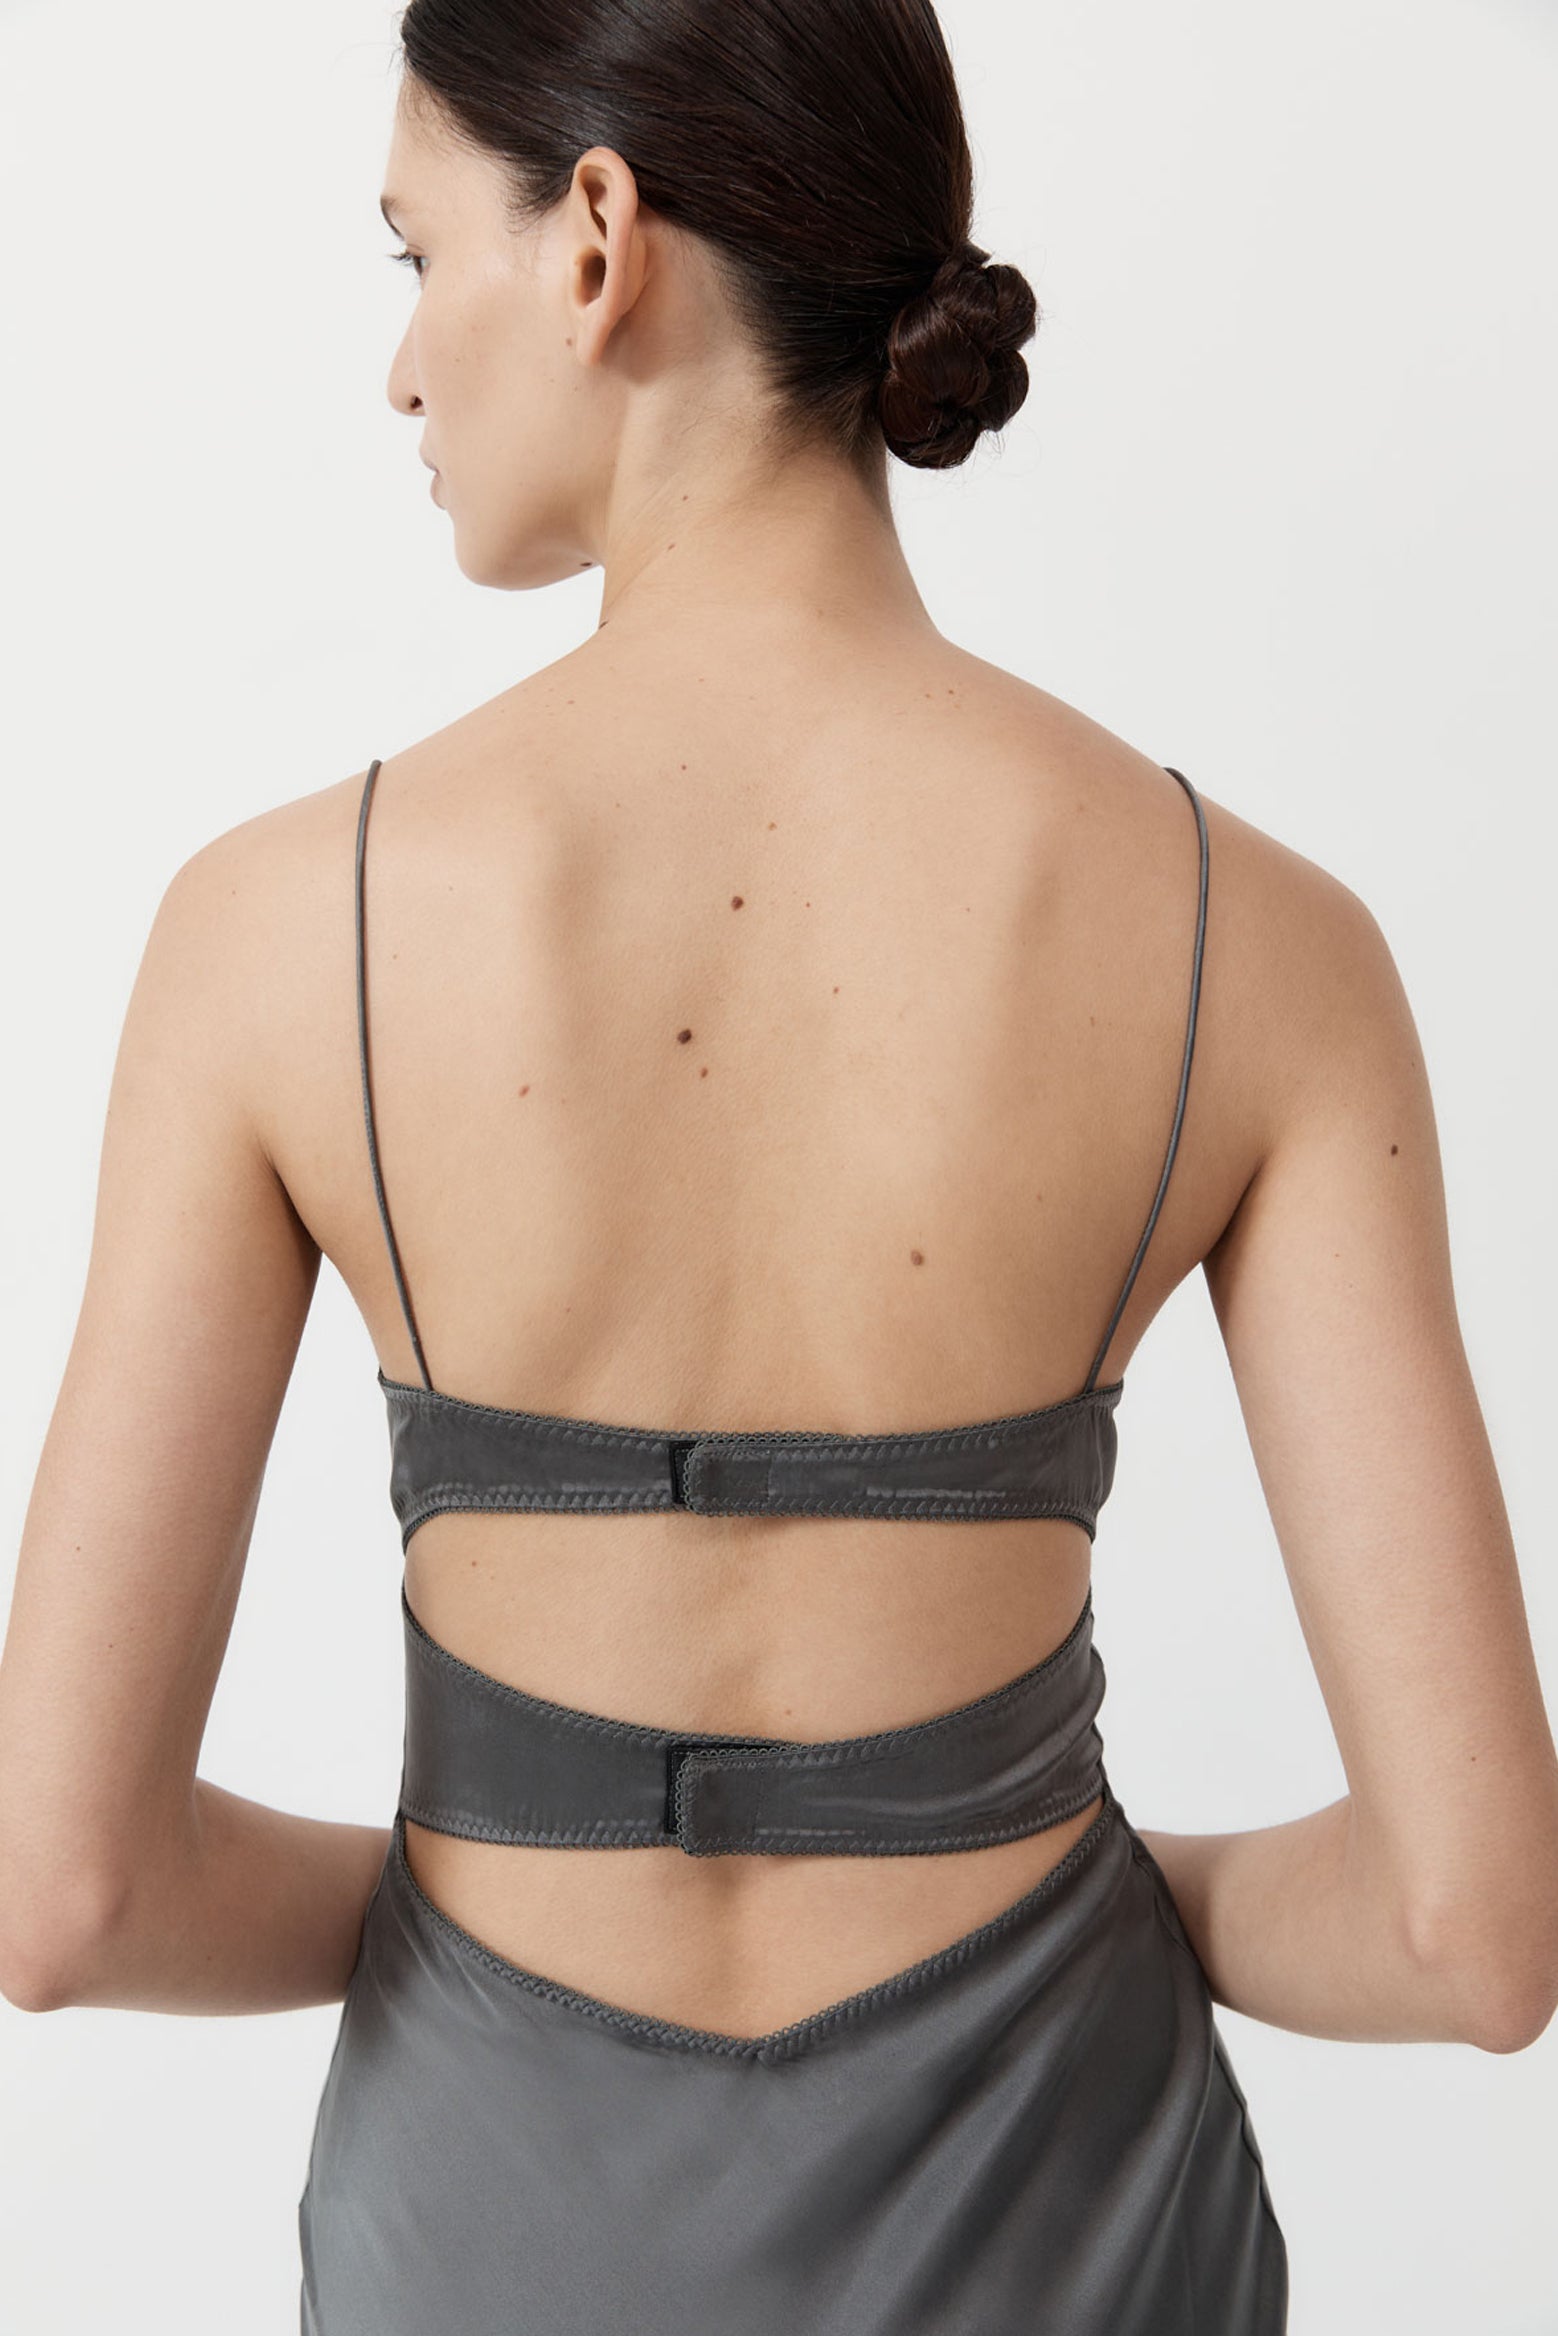 St Agni Soft Silk Bra Bias Slip Dress in Pewter Grey available at The New Trend Australia.